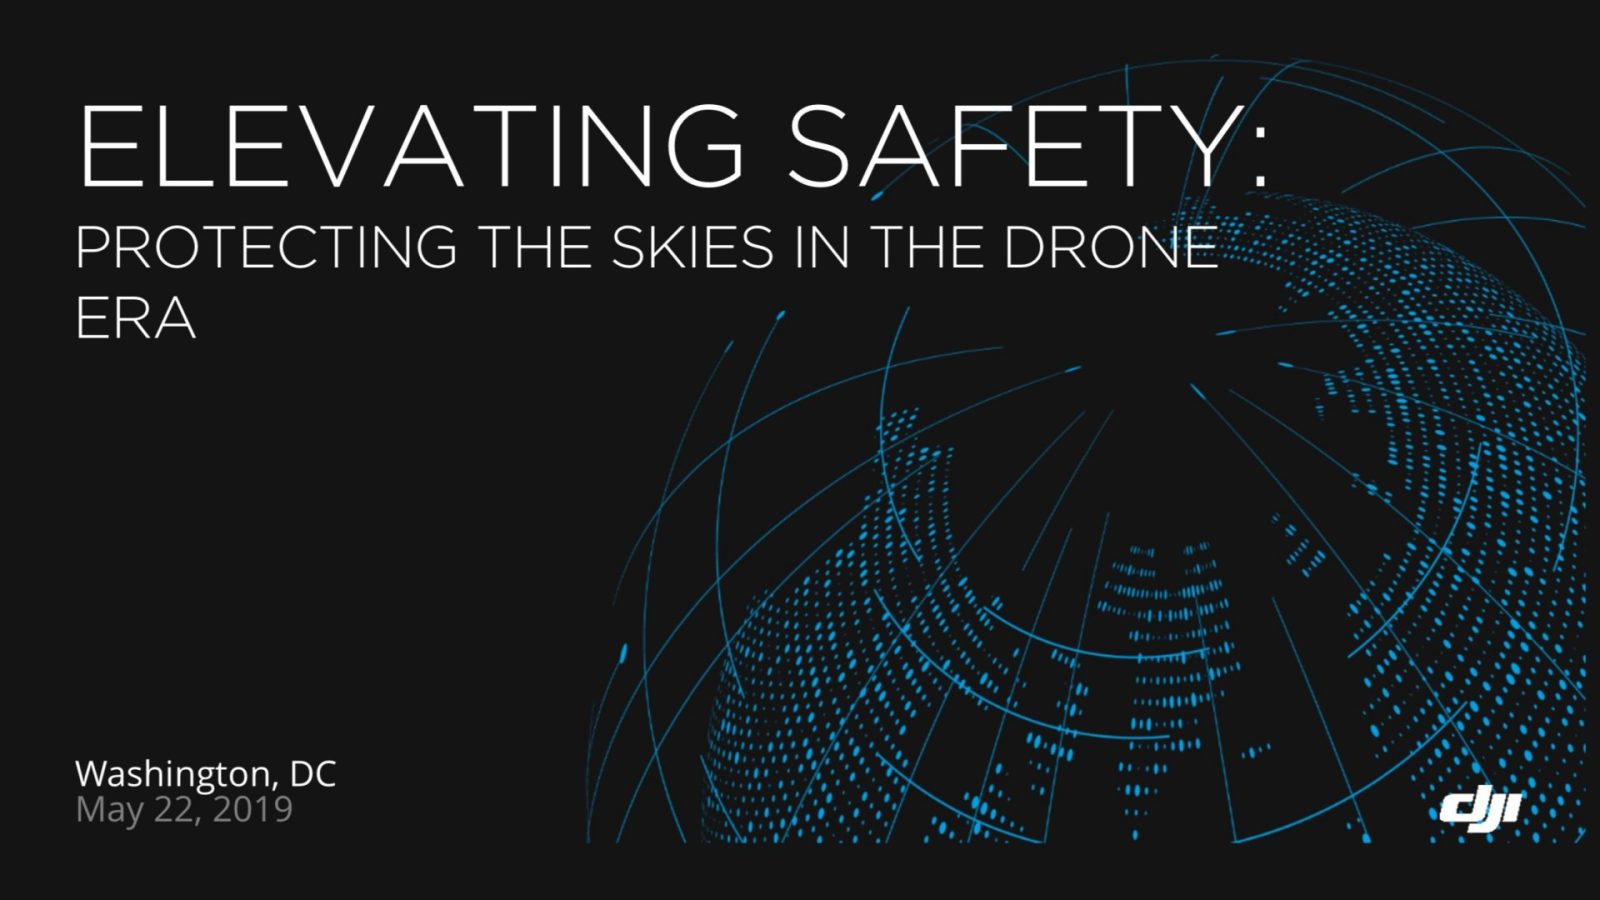 Elevating Safety Protecting the Skies in the Drone Era - ADS-B for all DJI drones over 250 grams as of 1-1-2020